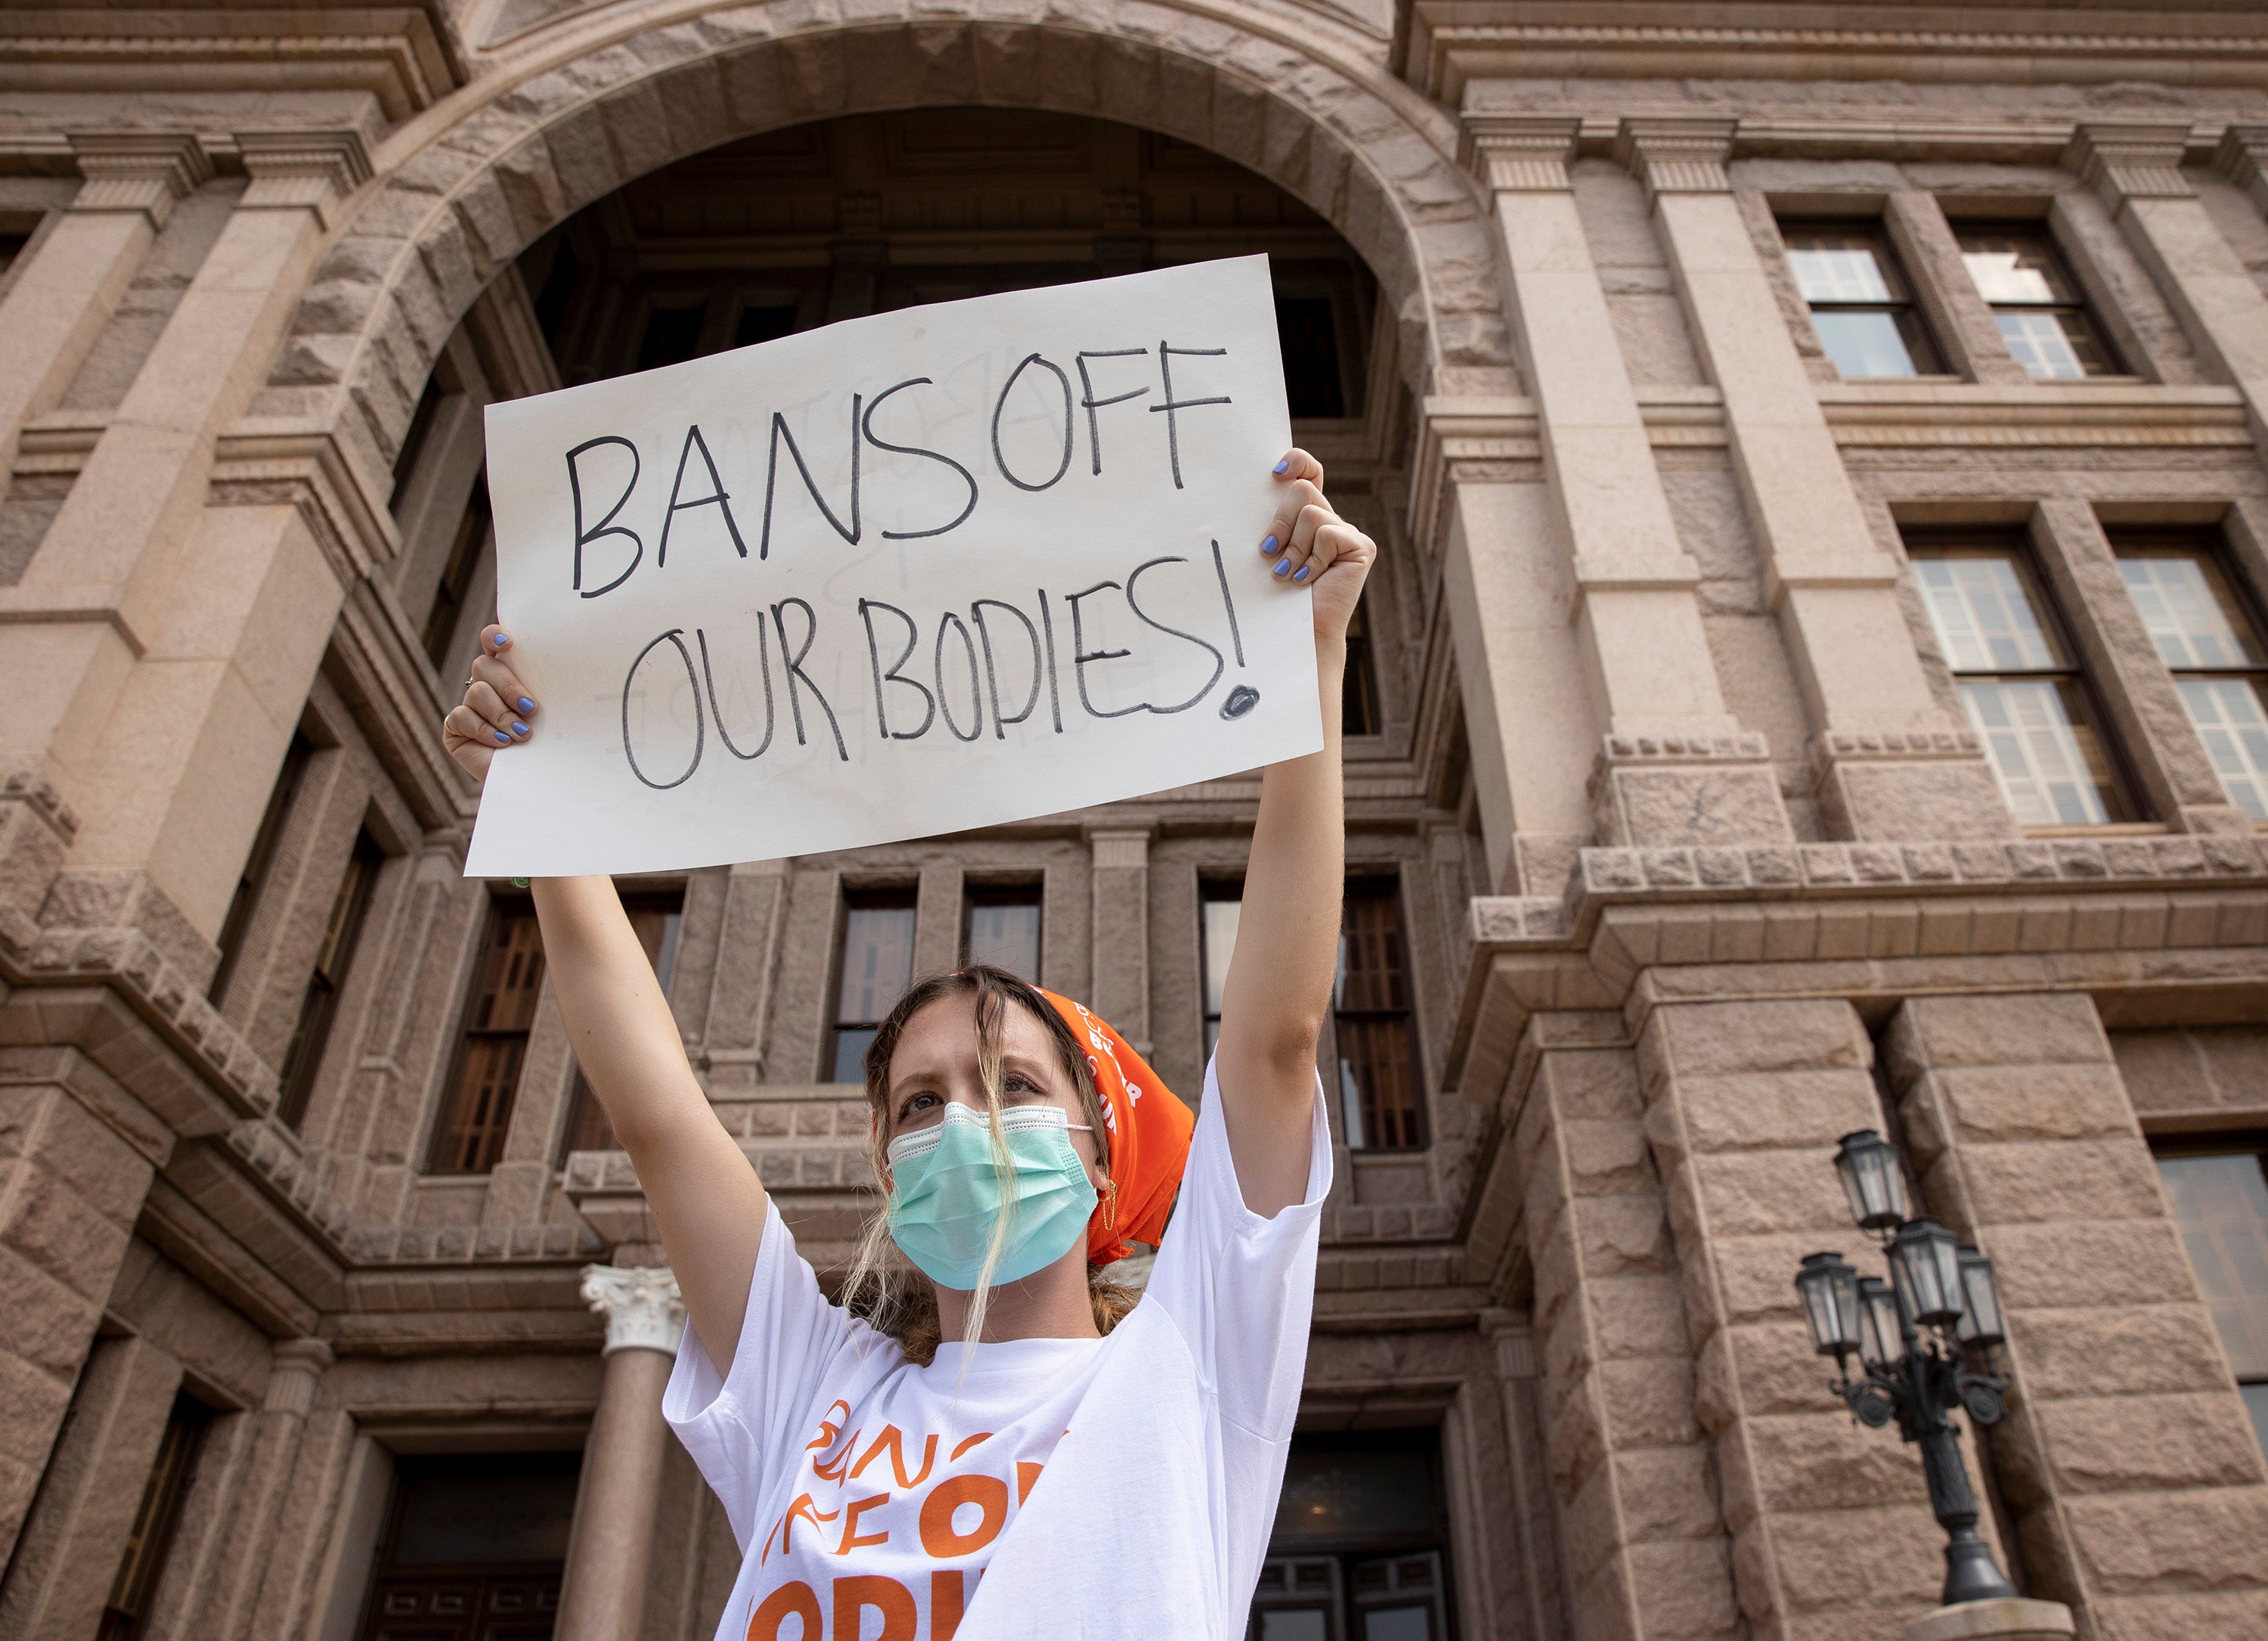 File: A protestor holds a placard during a rally against the Texas abortion law